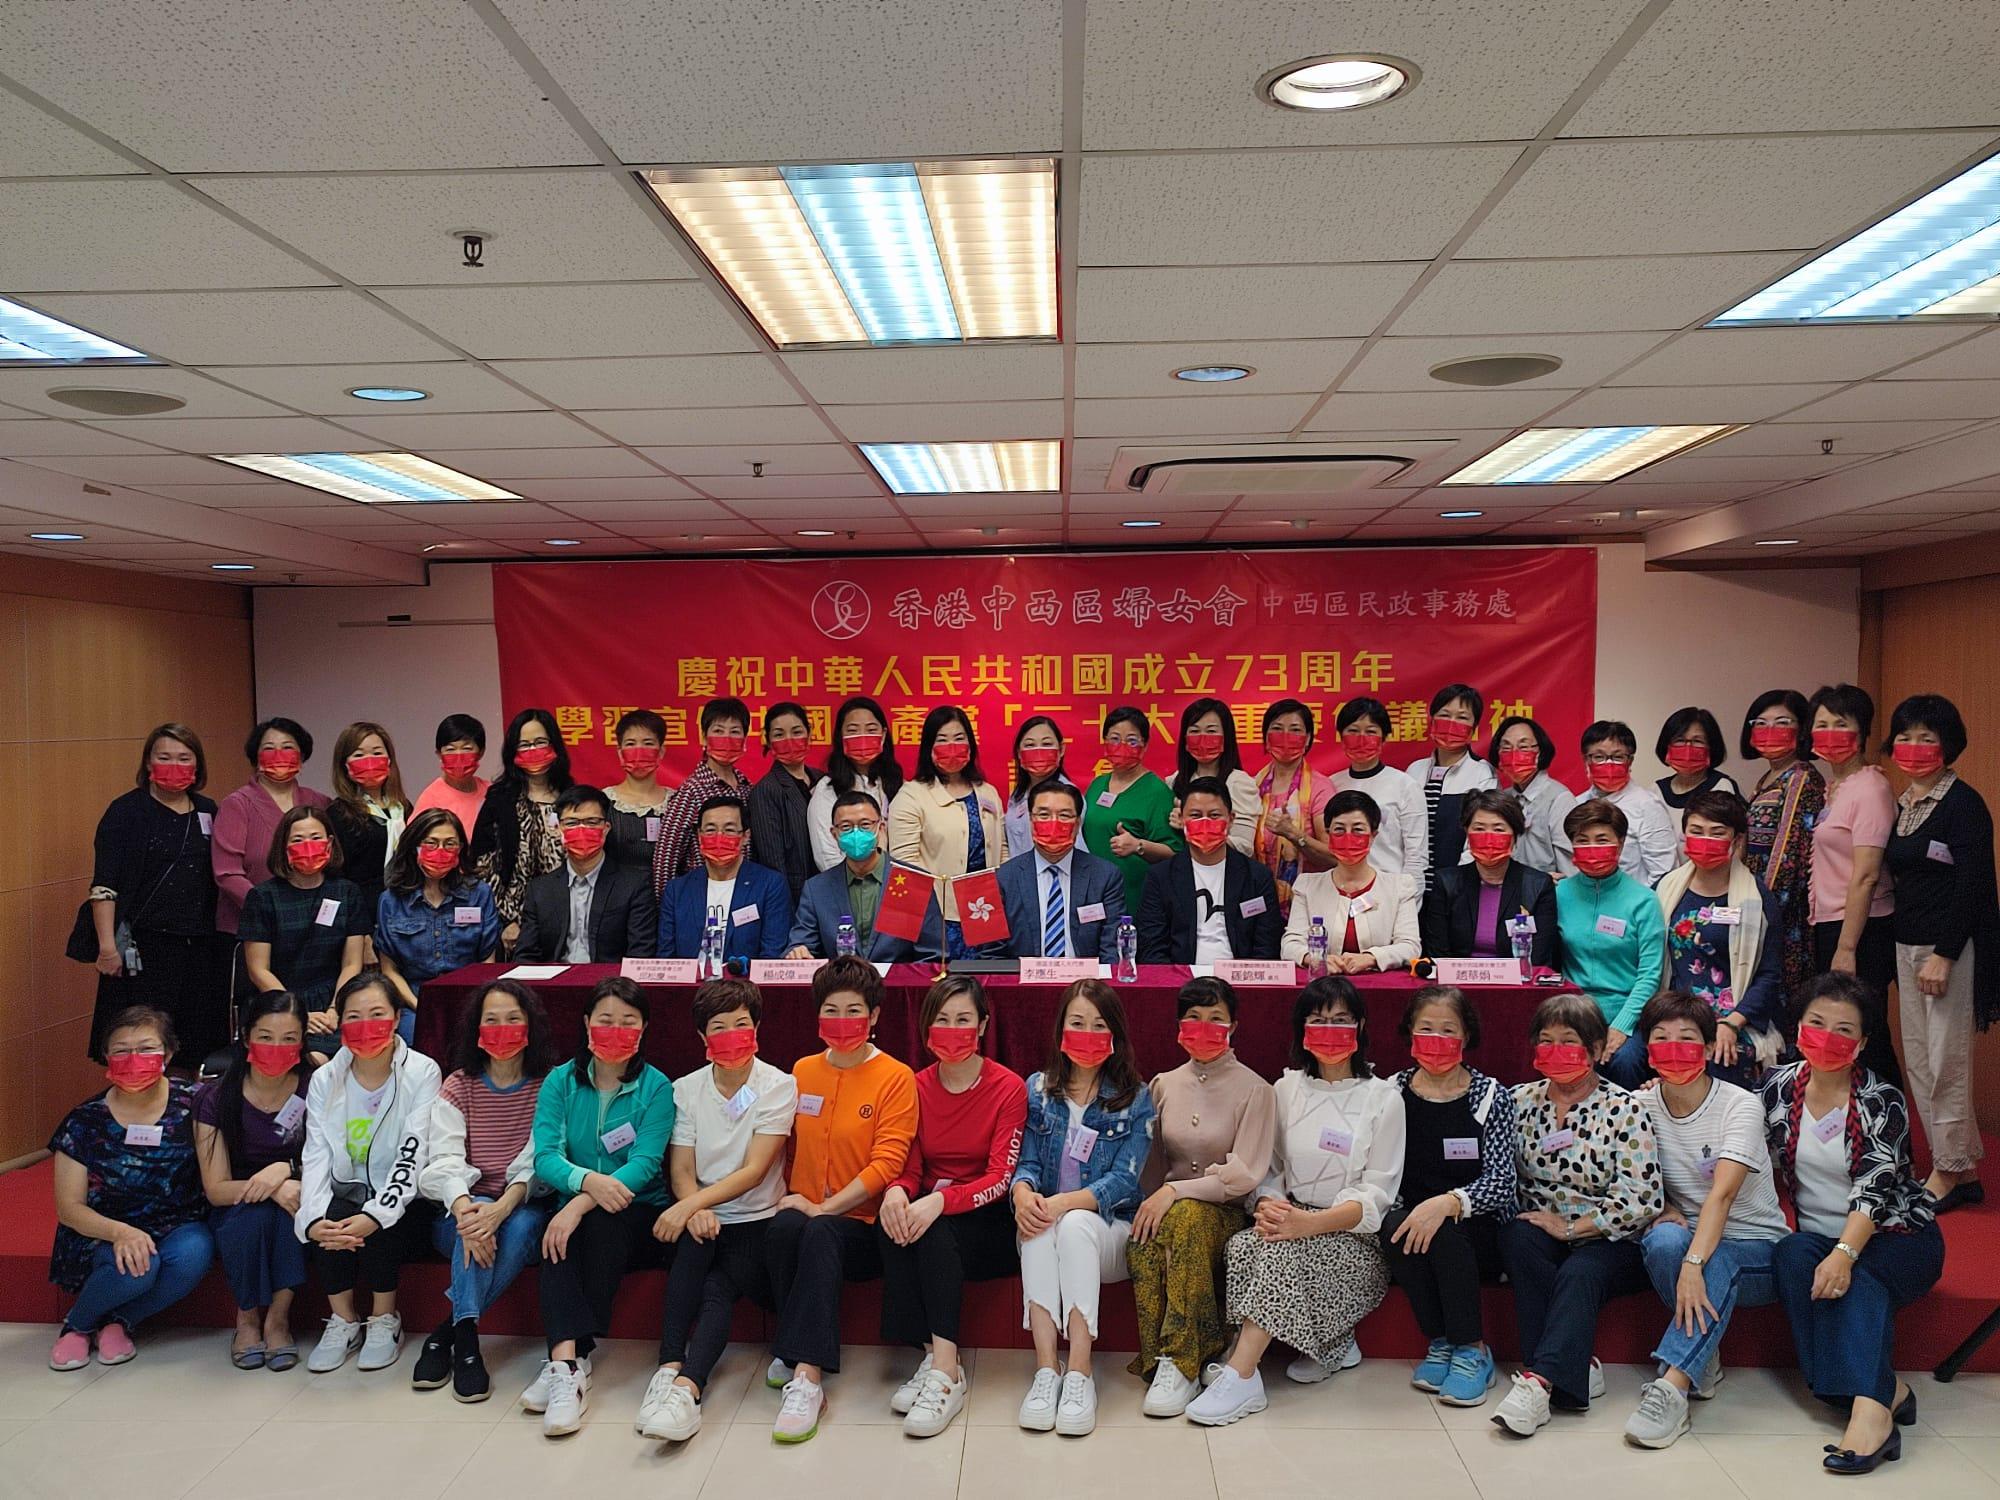 The Central and Western District Office, together with the Hong Kong Central & Western District Women's Association, held a study session on "Spirit of the 20th National Congress of the Communist Party of China" in Sheung Wan on October 28. Photo shows guests and participants at the session.